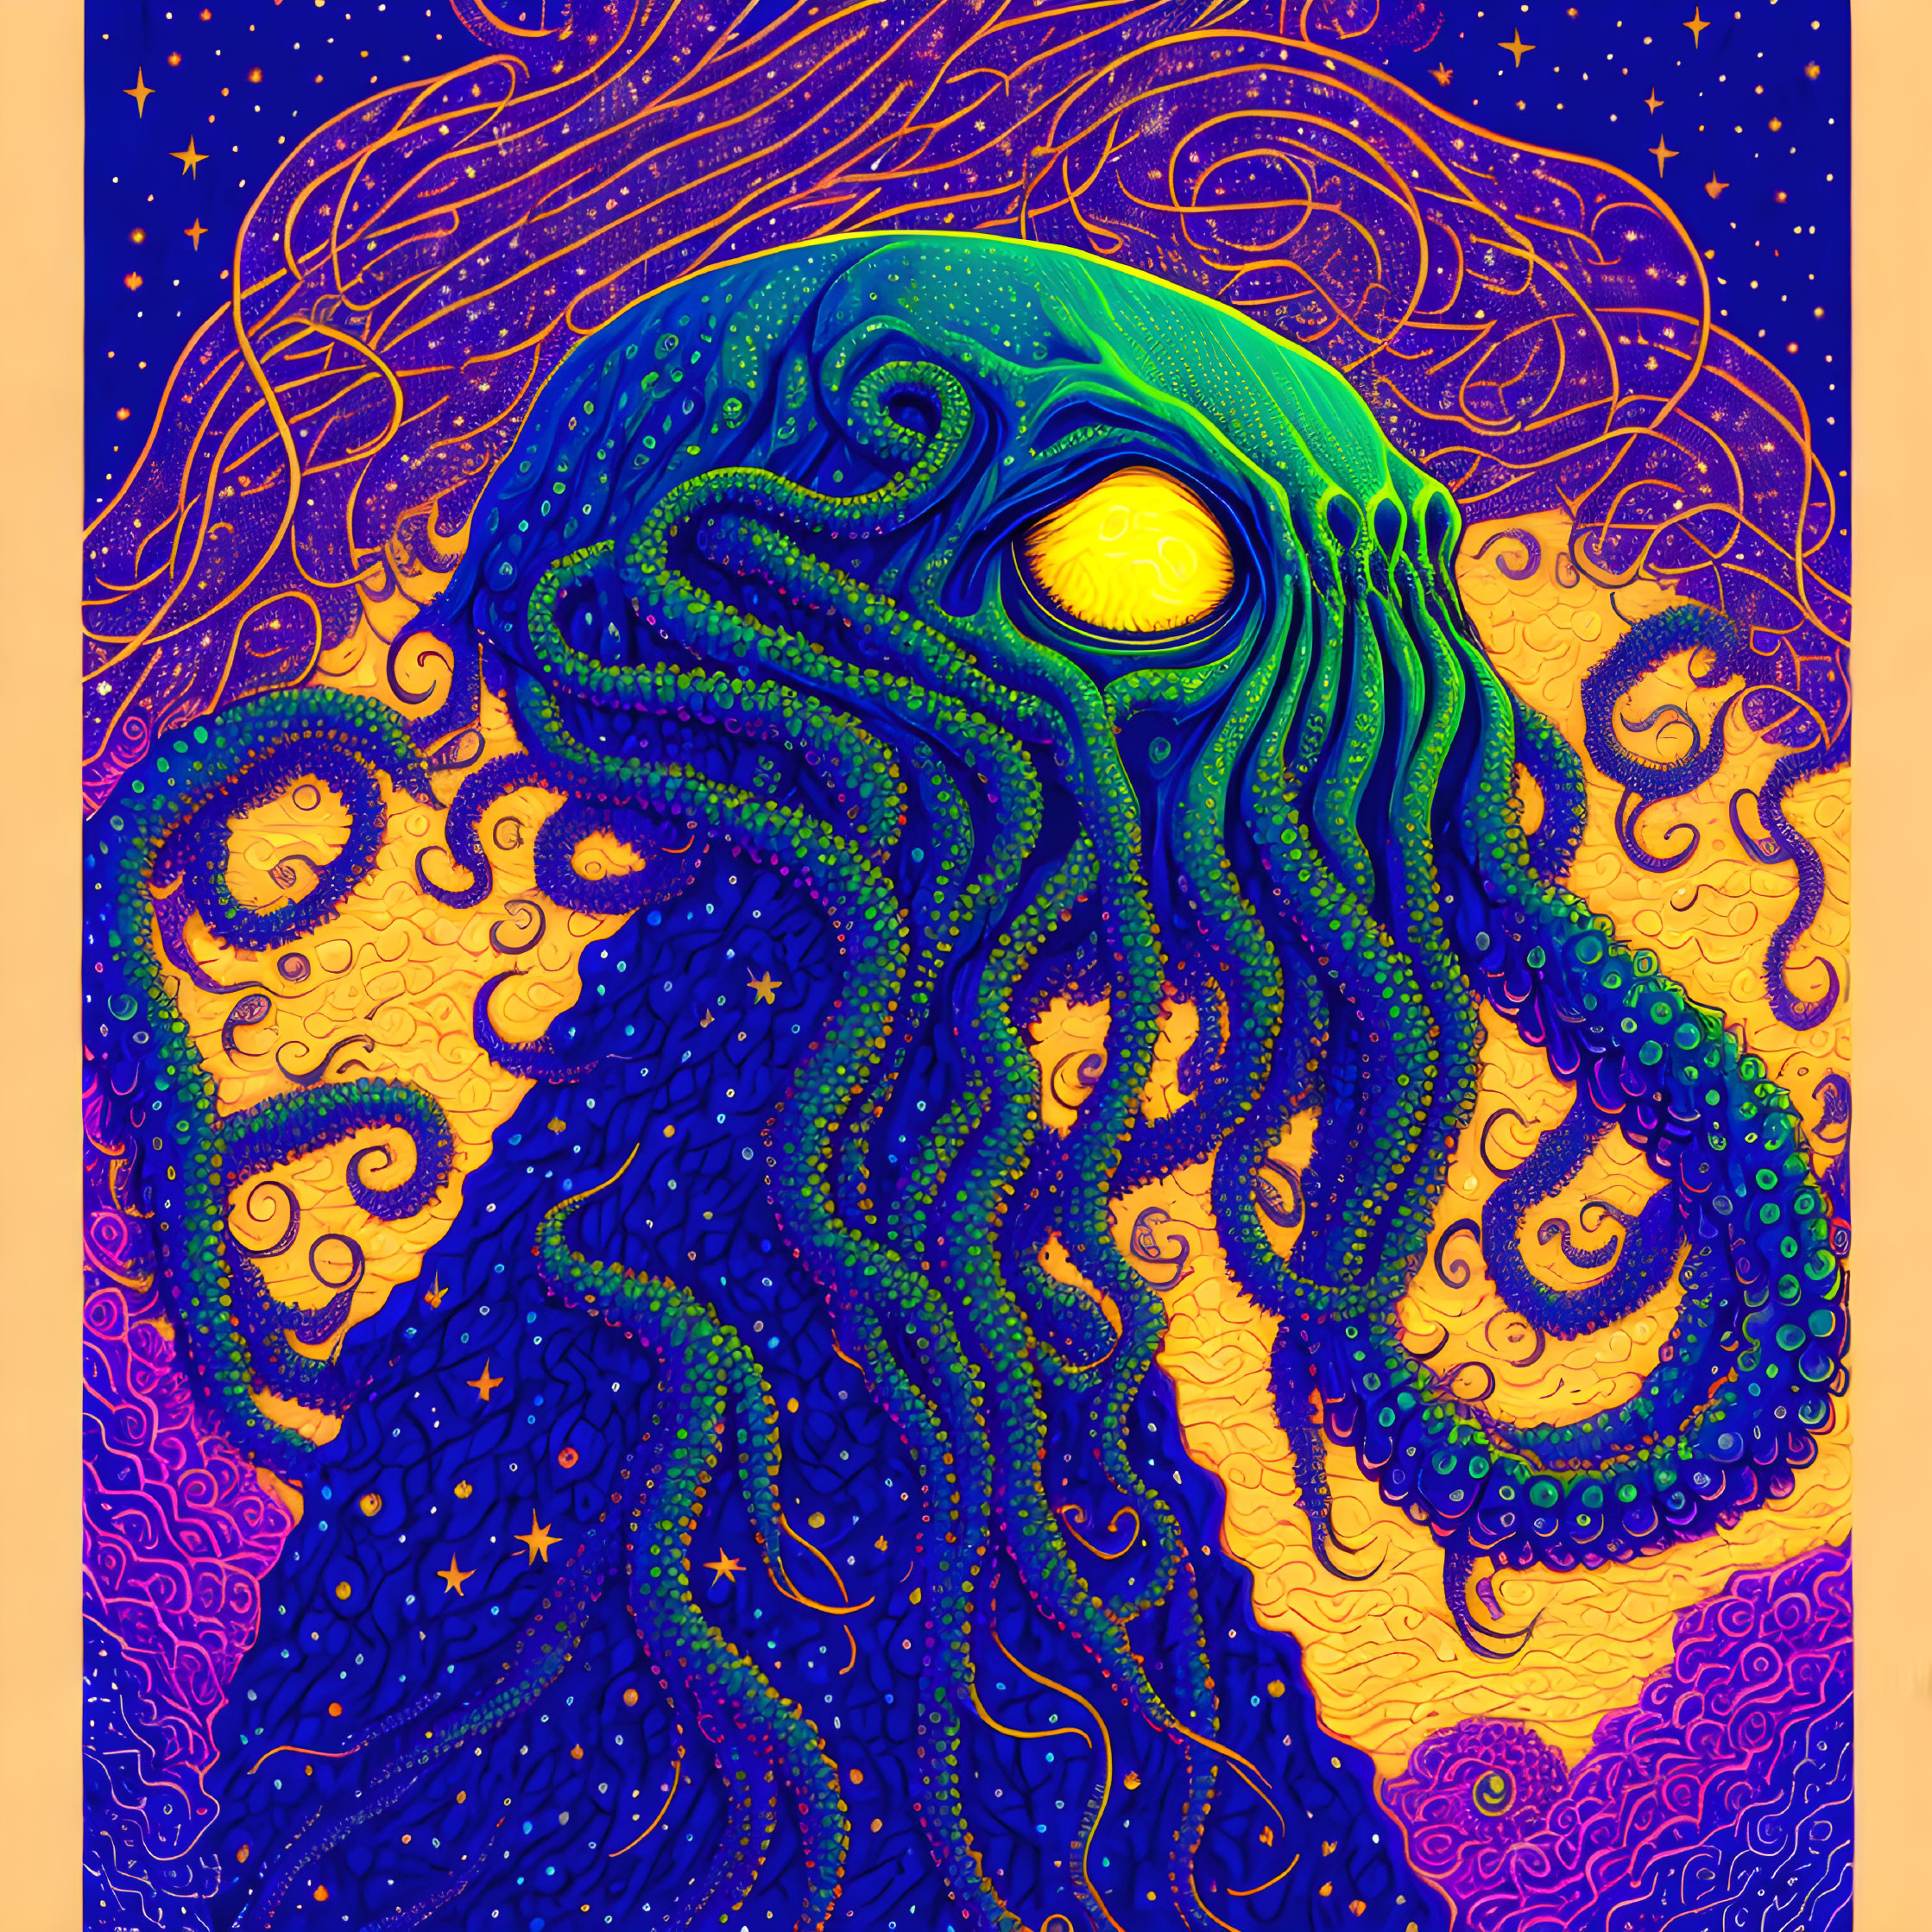 Colorful Psychedelic Octopus Illustration on Starry Purple & Orange Background